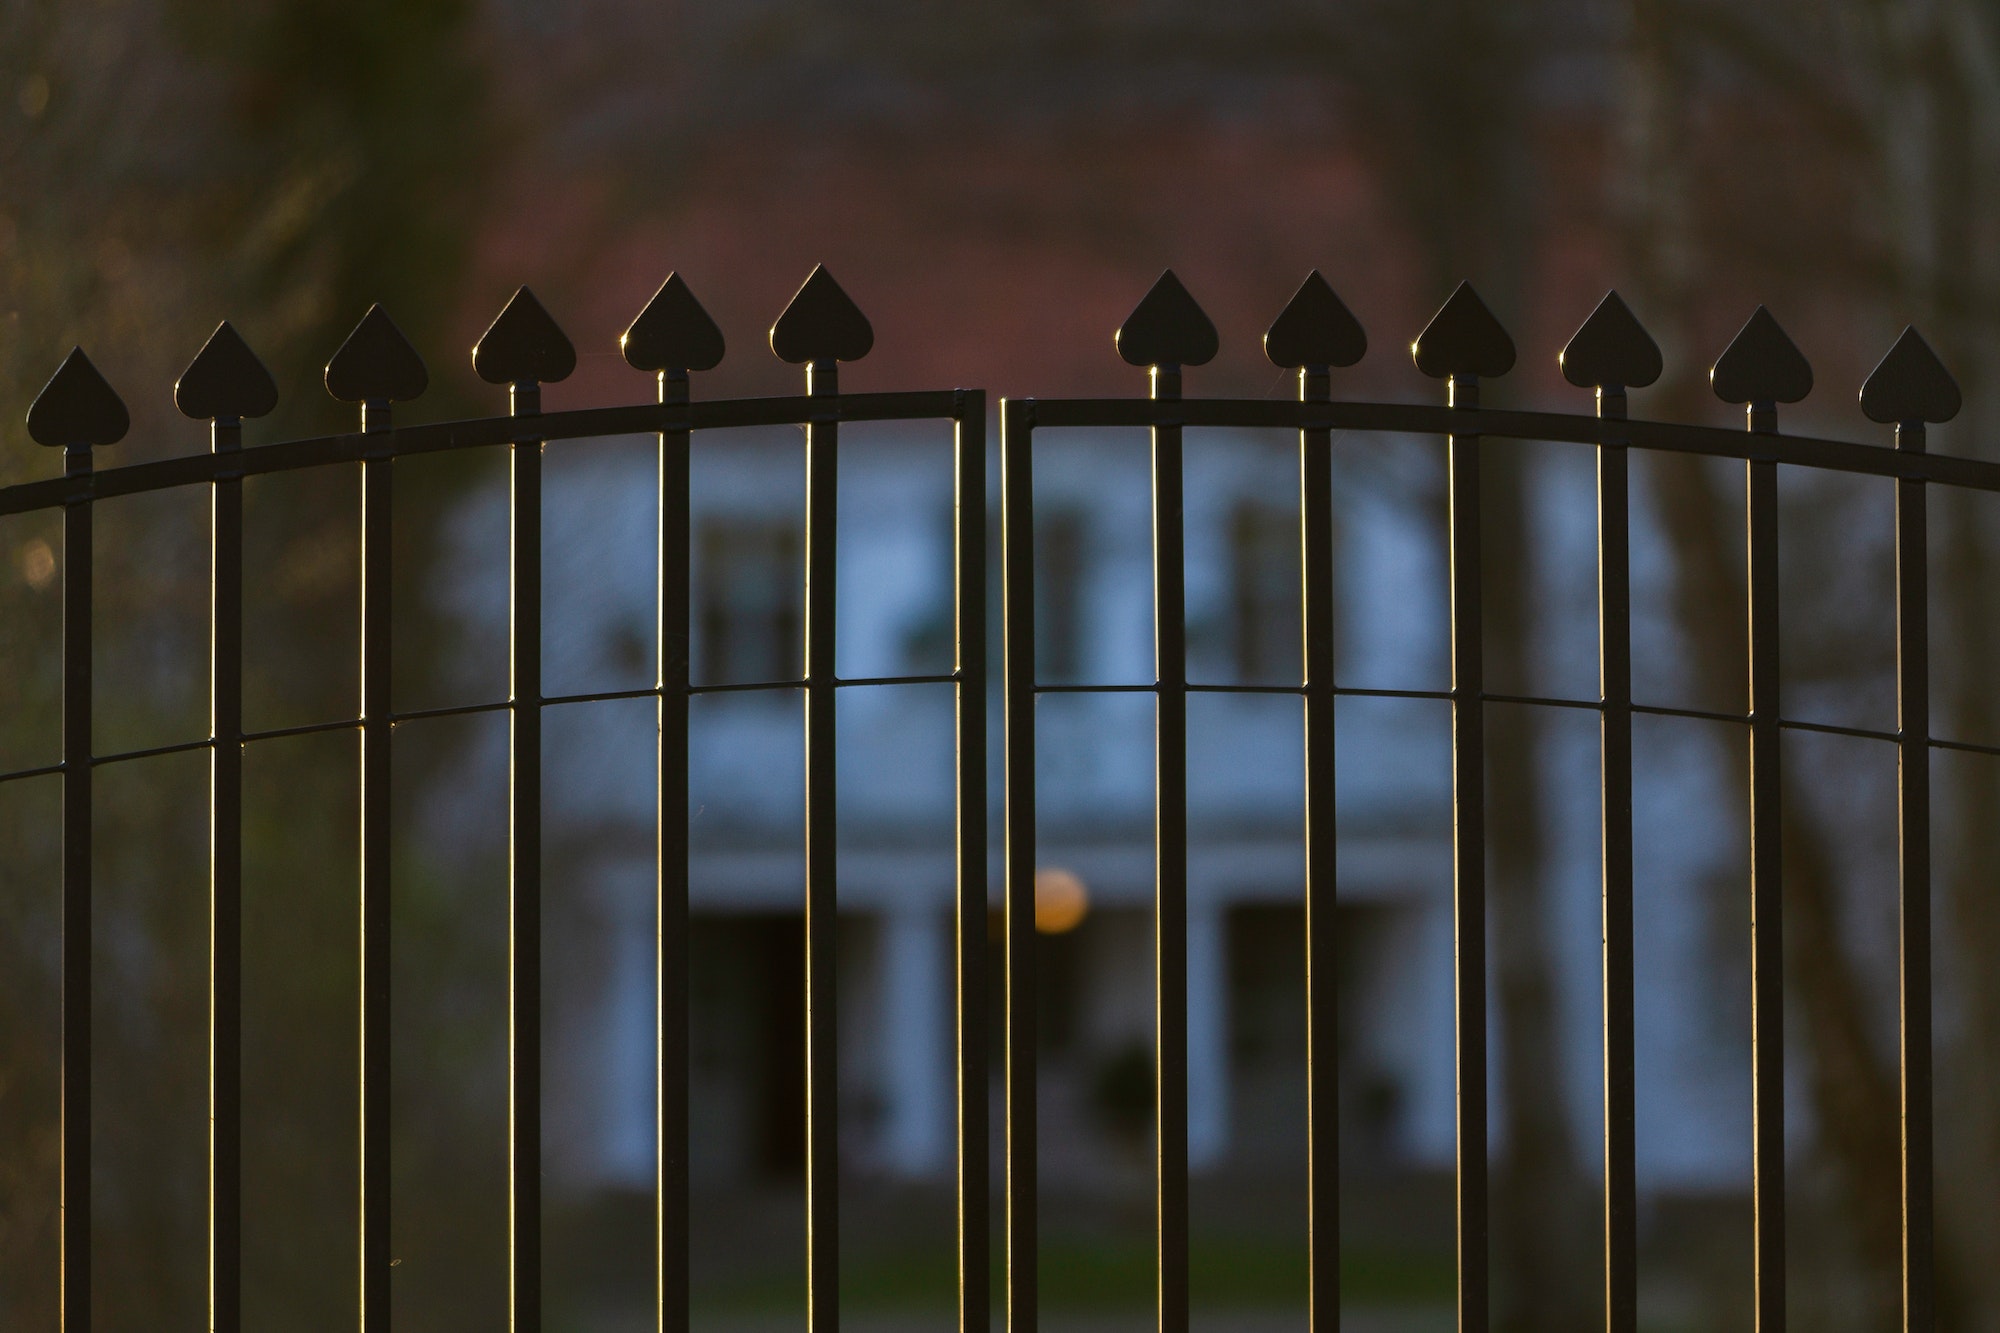 Beautiful and classy ornamented steel fence gate to an impressive old big white house with garden